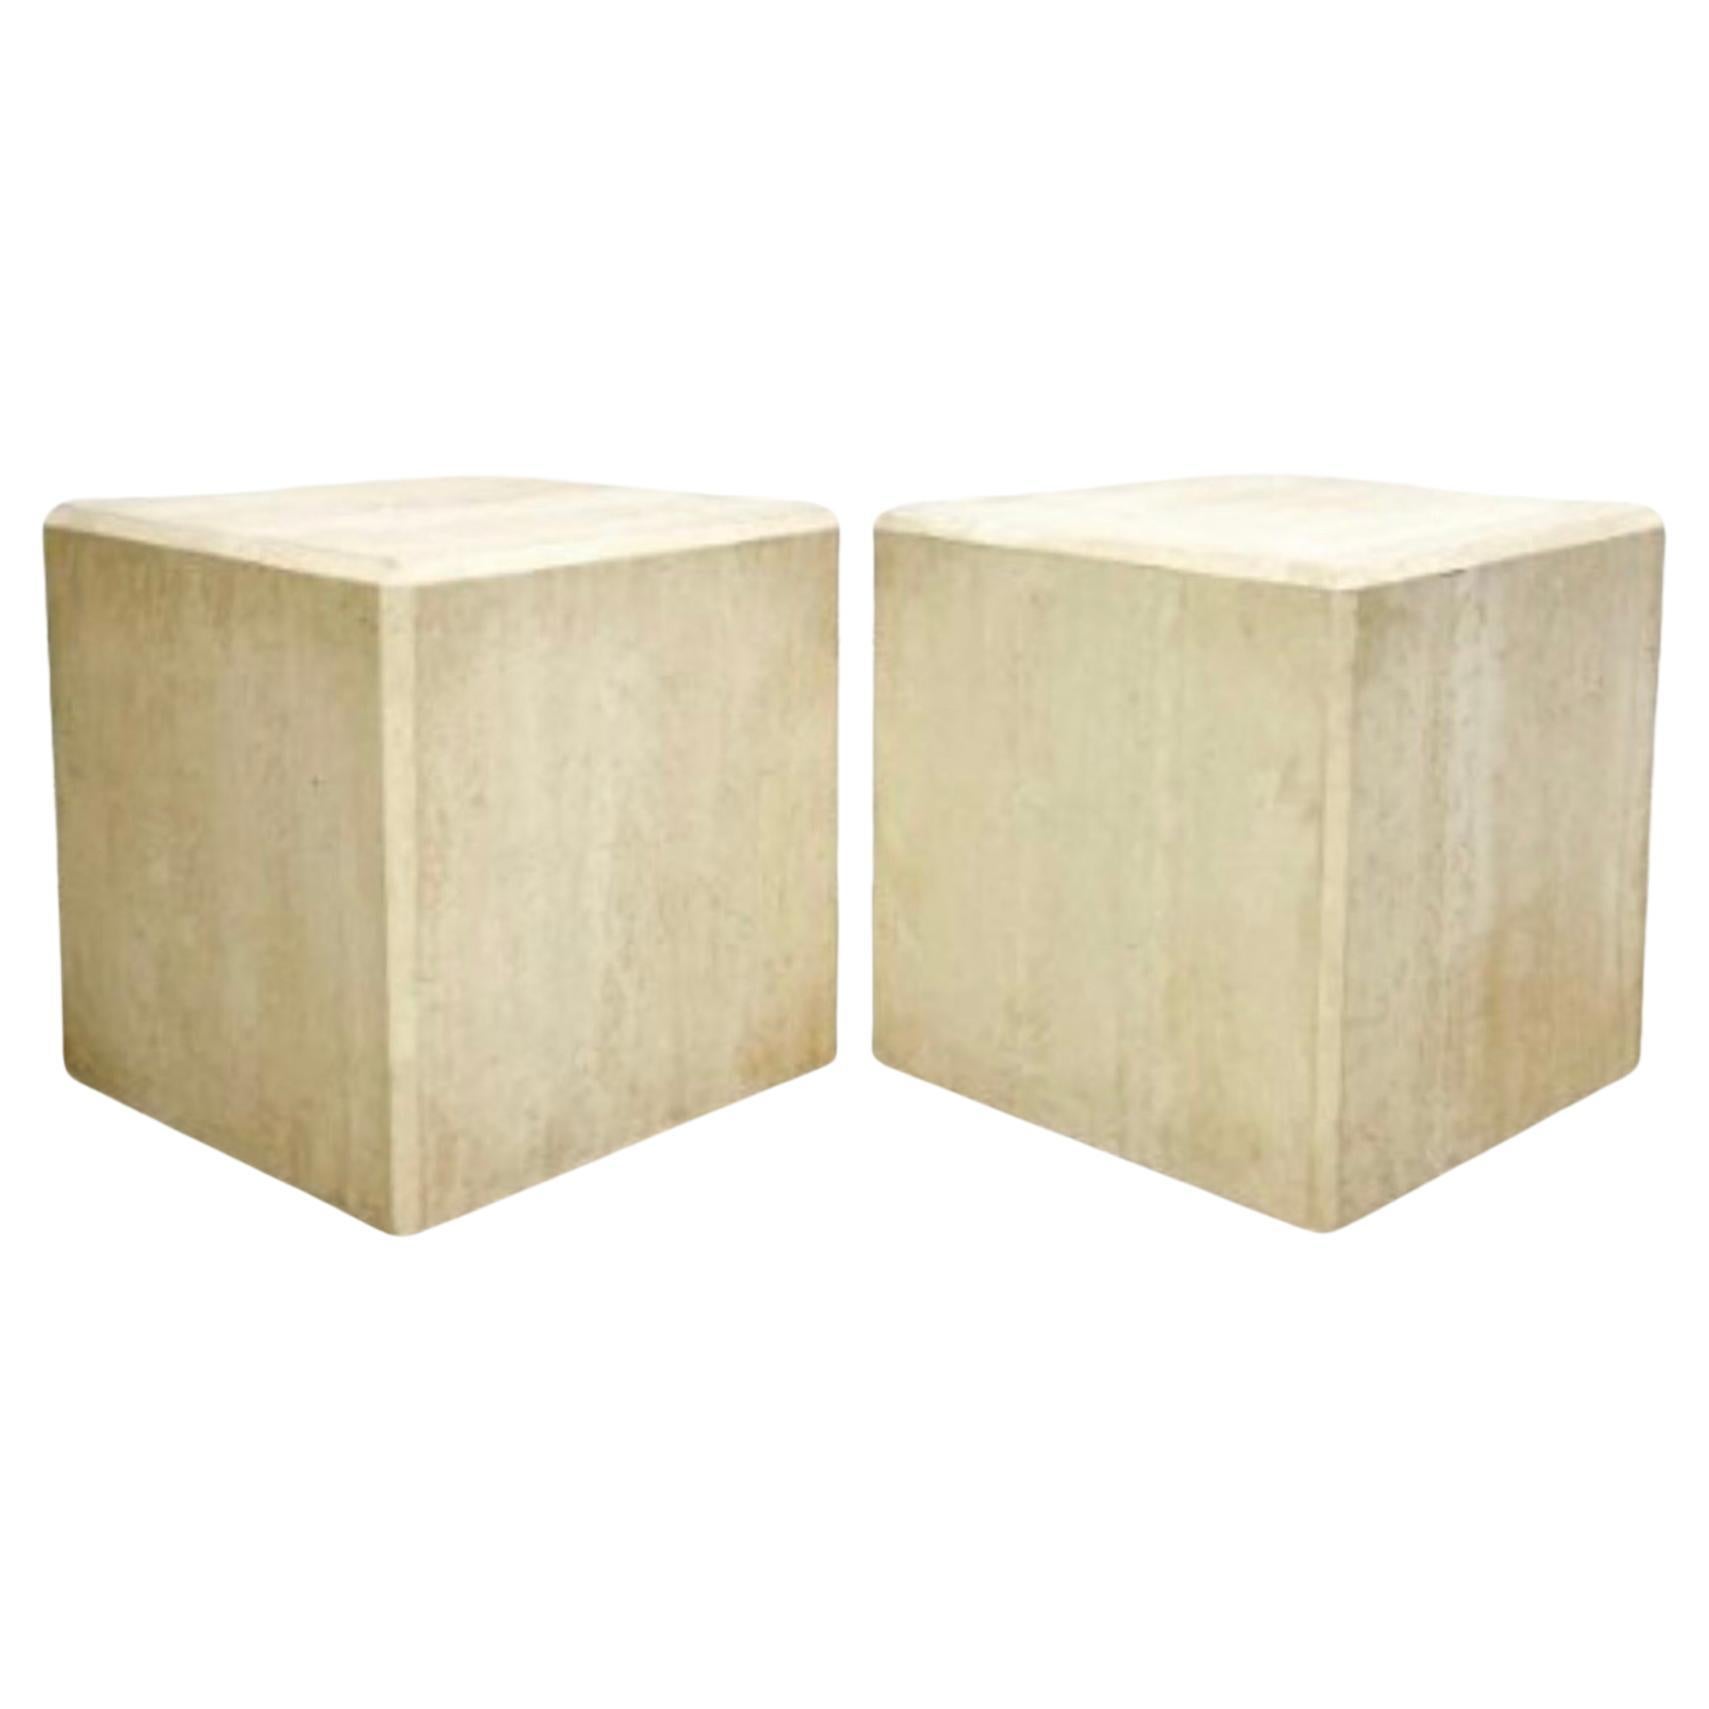 Large Scale Organic Modern Travertine Stone Side Or End Tables / Pedestals -Pair For Sale